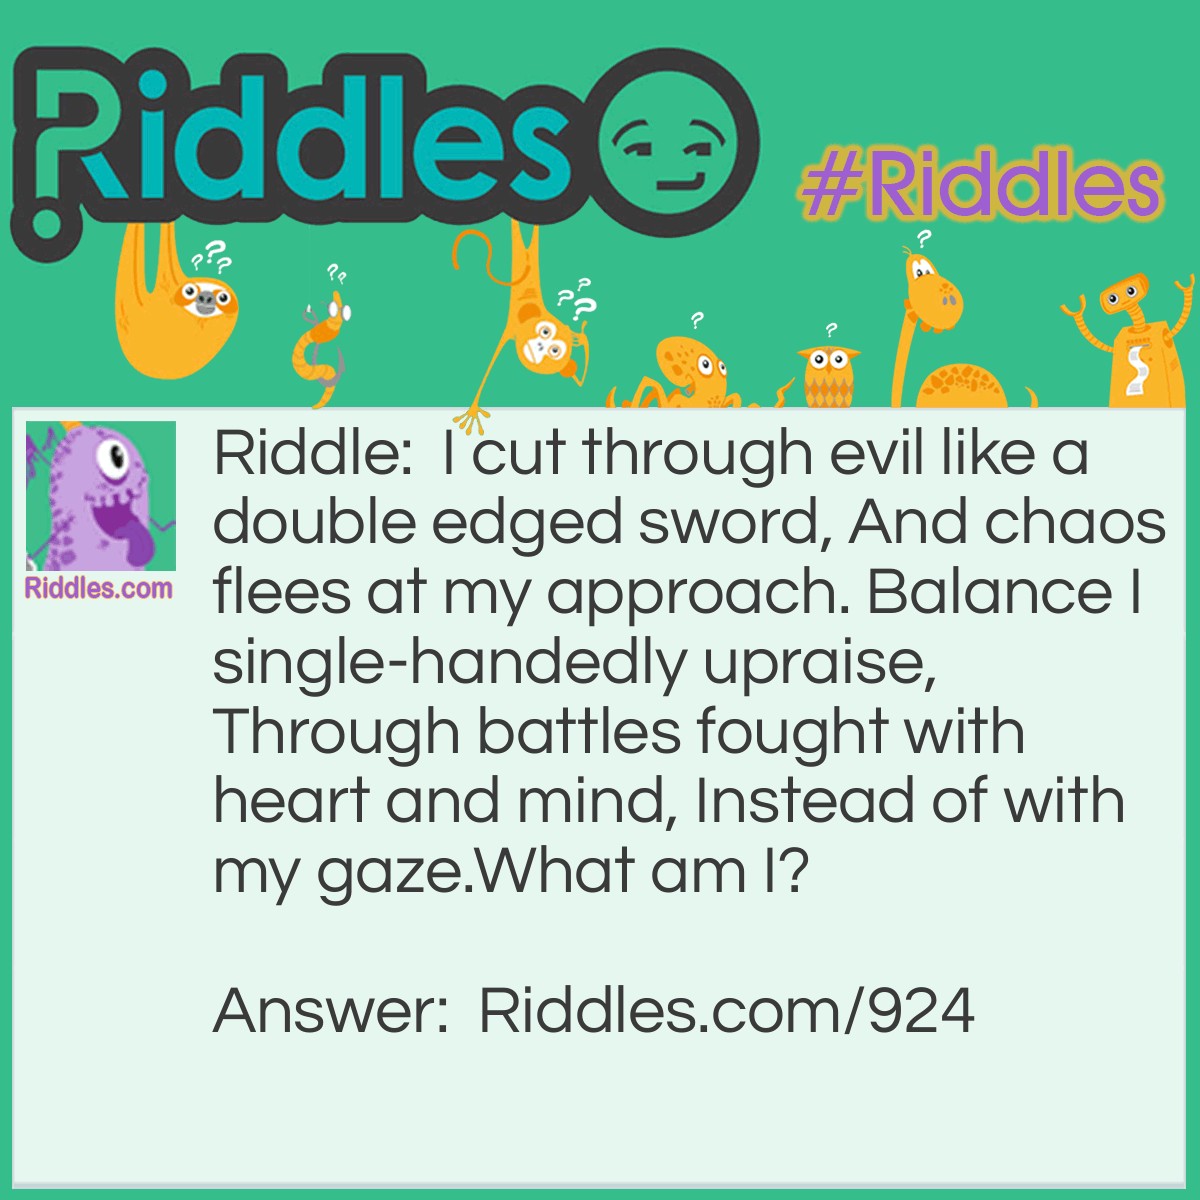 Riddle: I cut through evil like a double edged sword, And chaos flees at my approach. Balance I single-handedly upraise, Through battles fought with heart and mind, Instead of with my gaze.
What am I? Answer: I am justice!